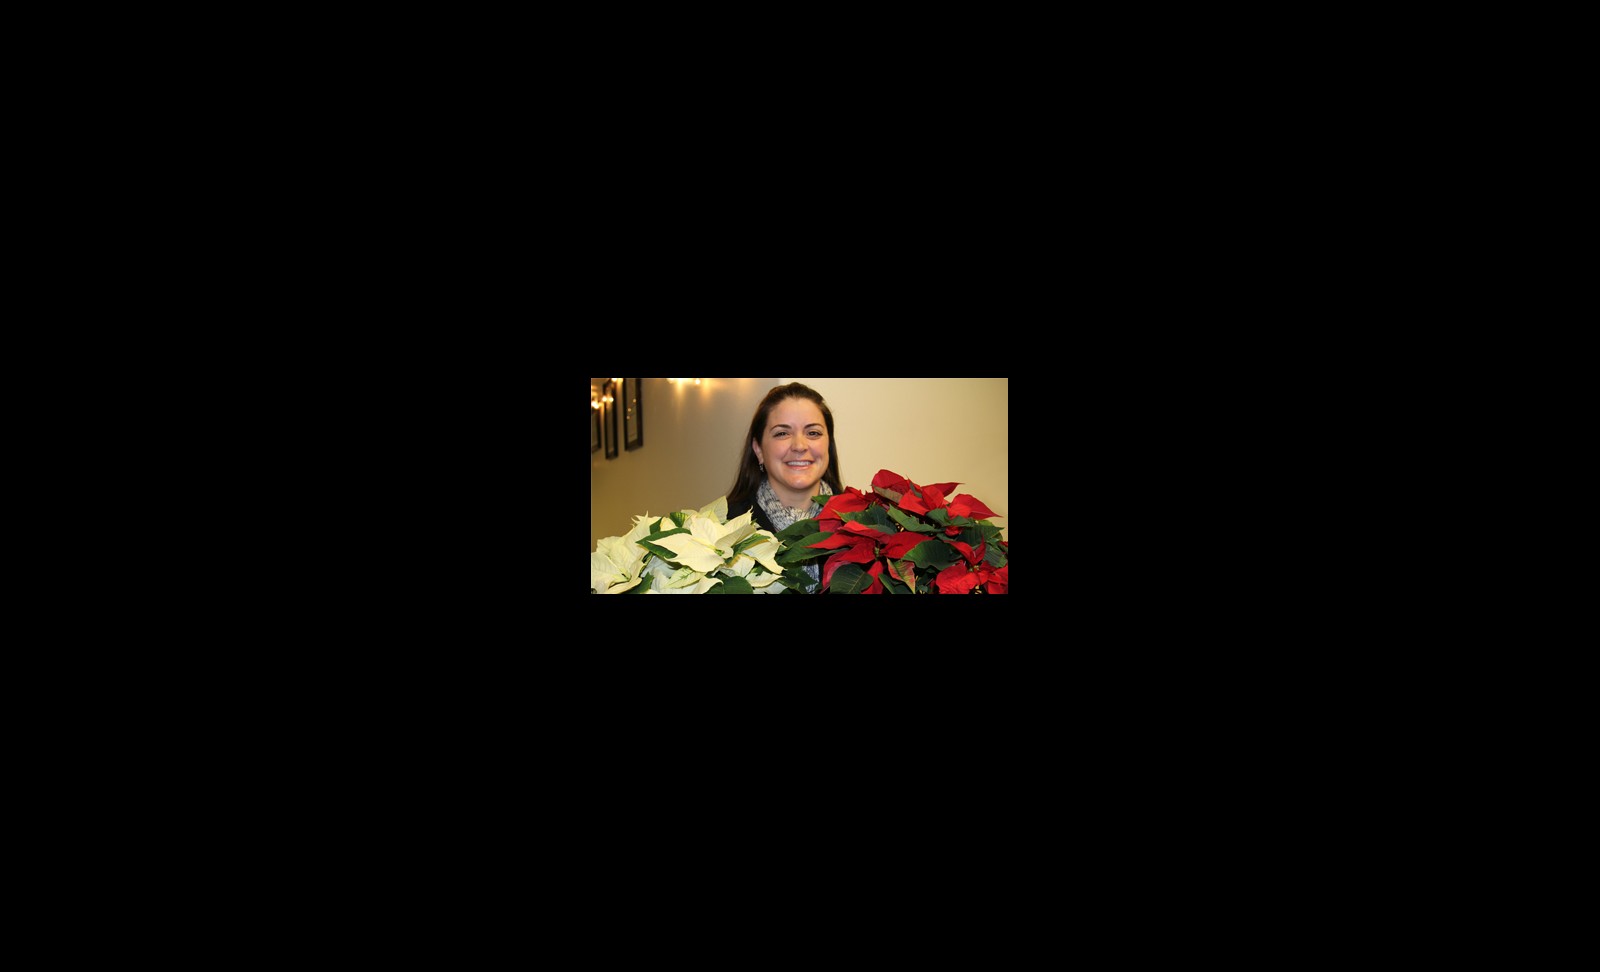 Jacqueline Correnti, Horticulture student and Presidential Ambassador